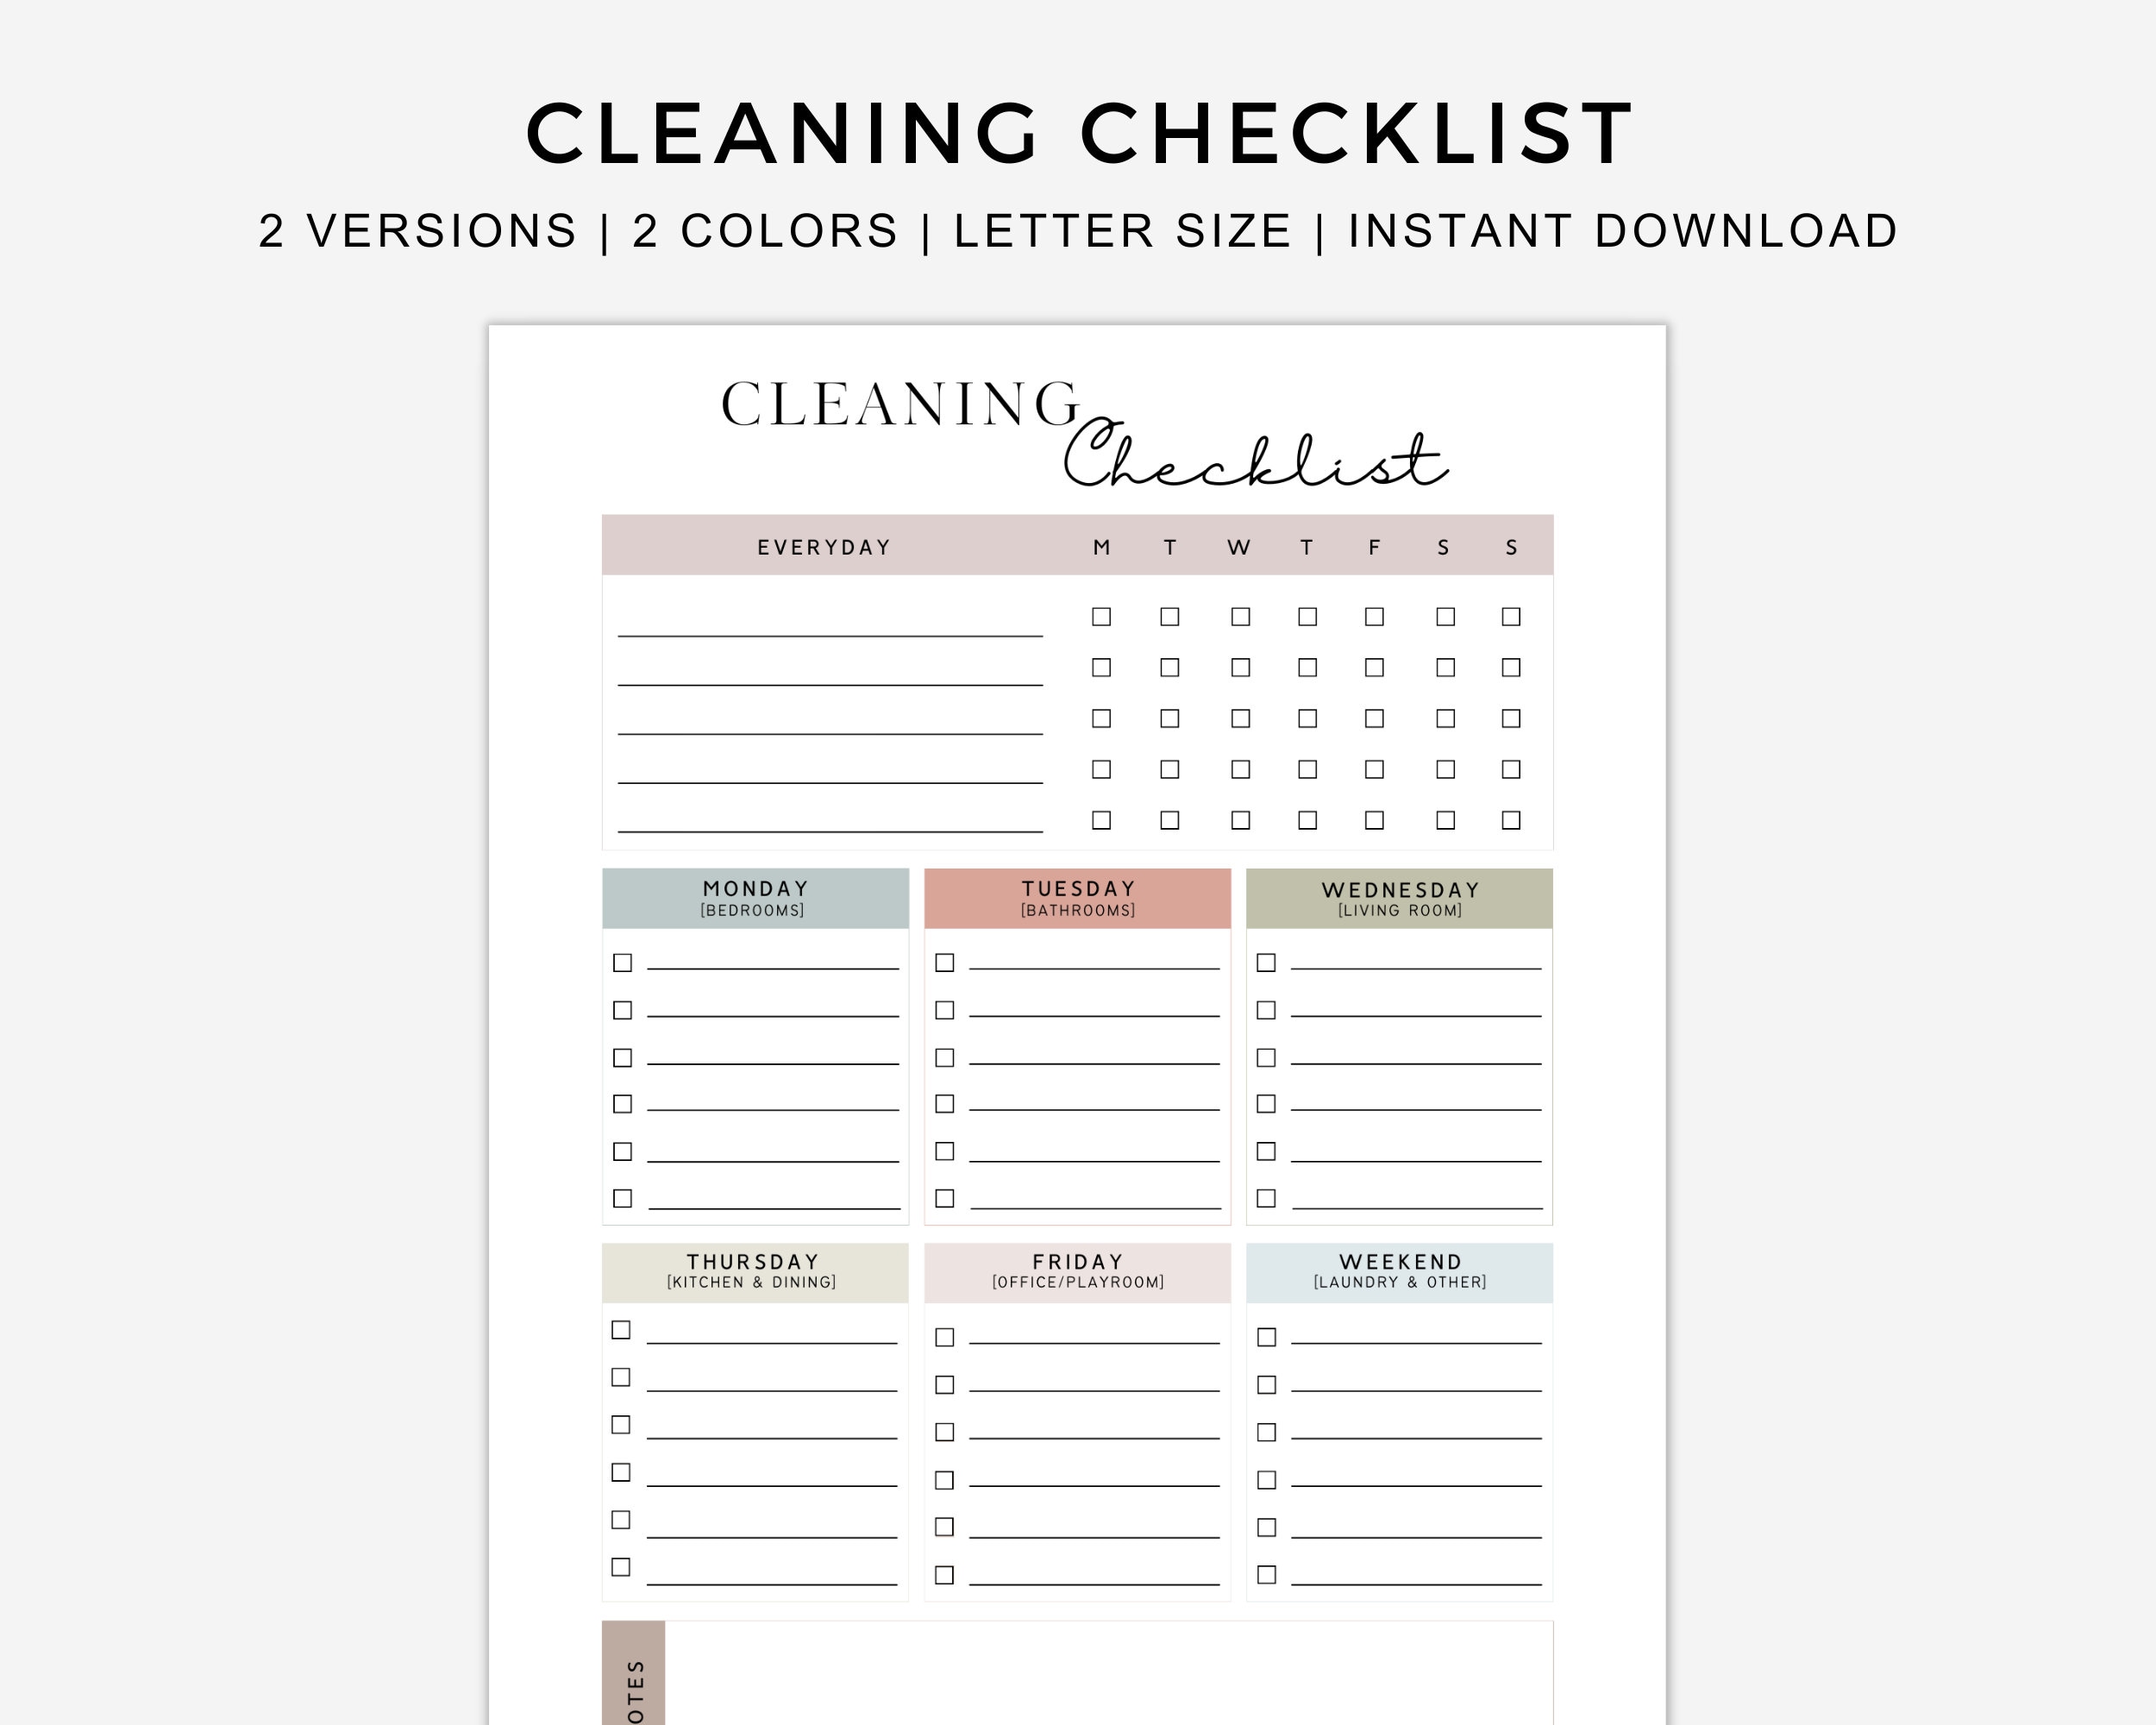 ADHD Speed Cleaning Flow Chart INSTANT DOWNLOAD 